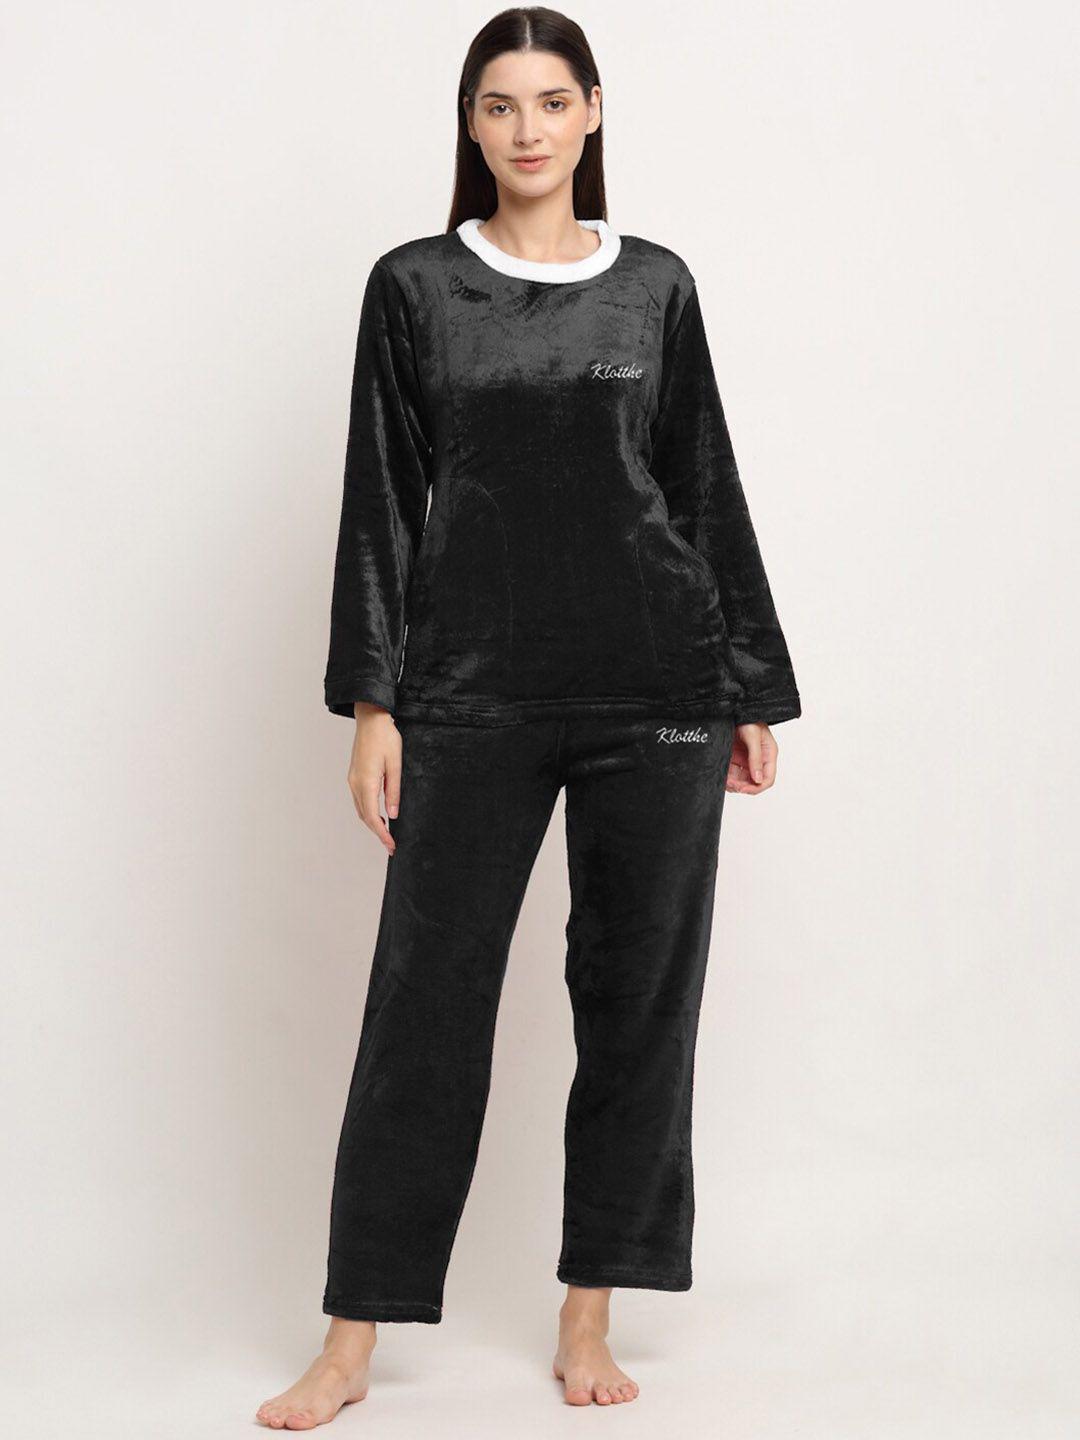 klotthe round neck top with trousers